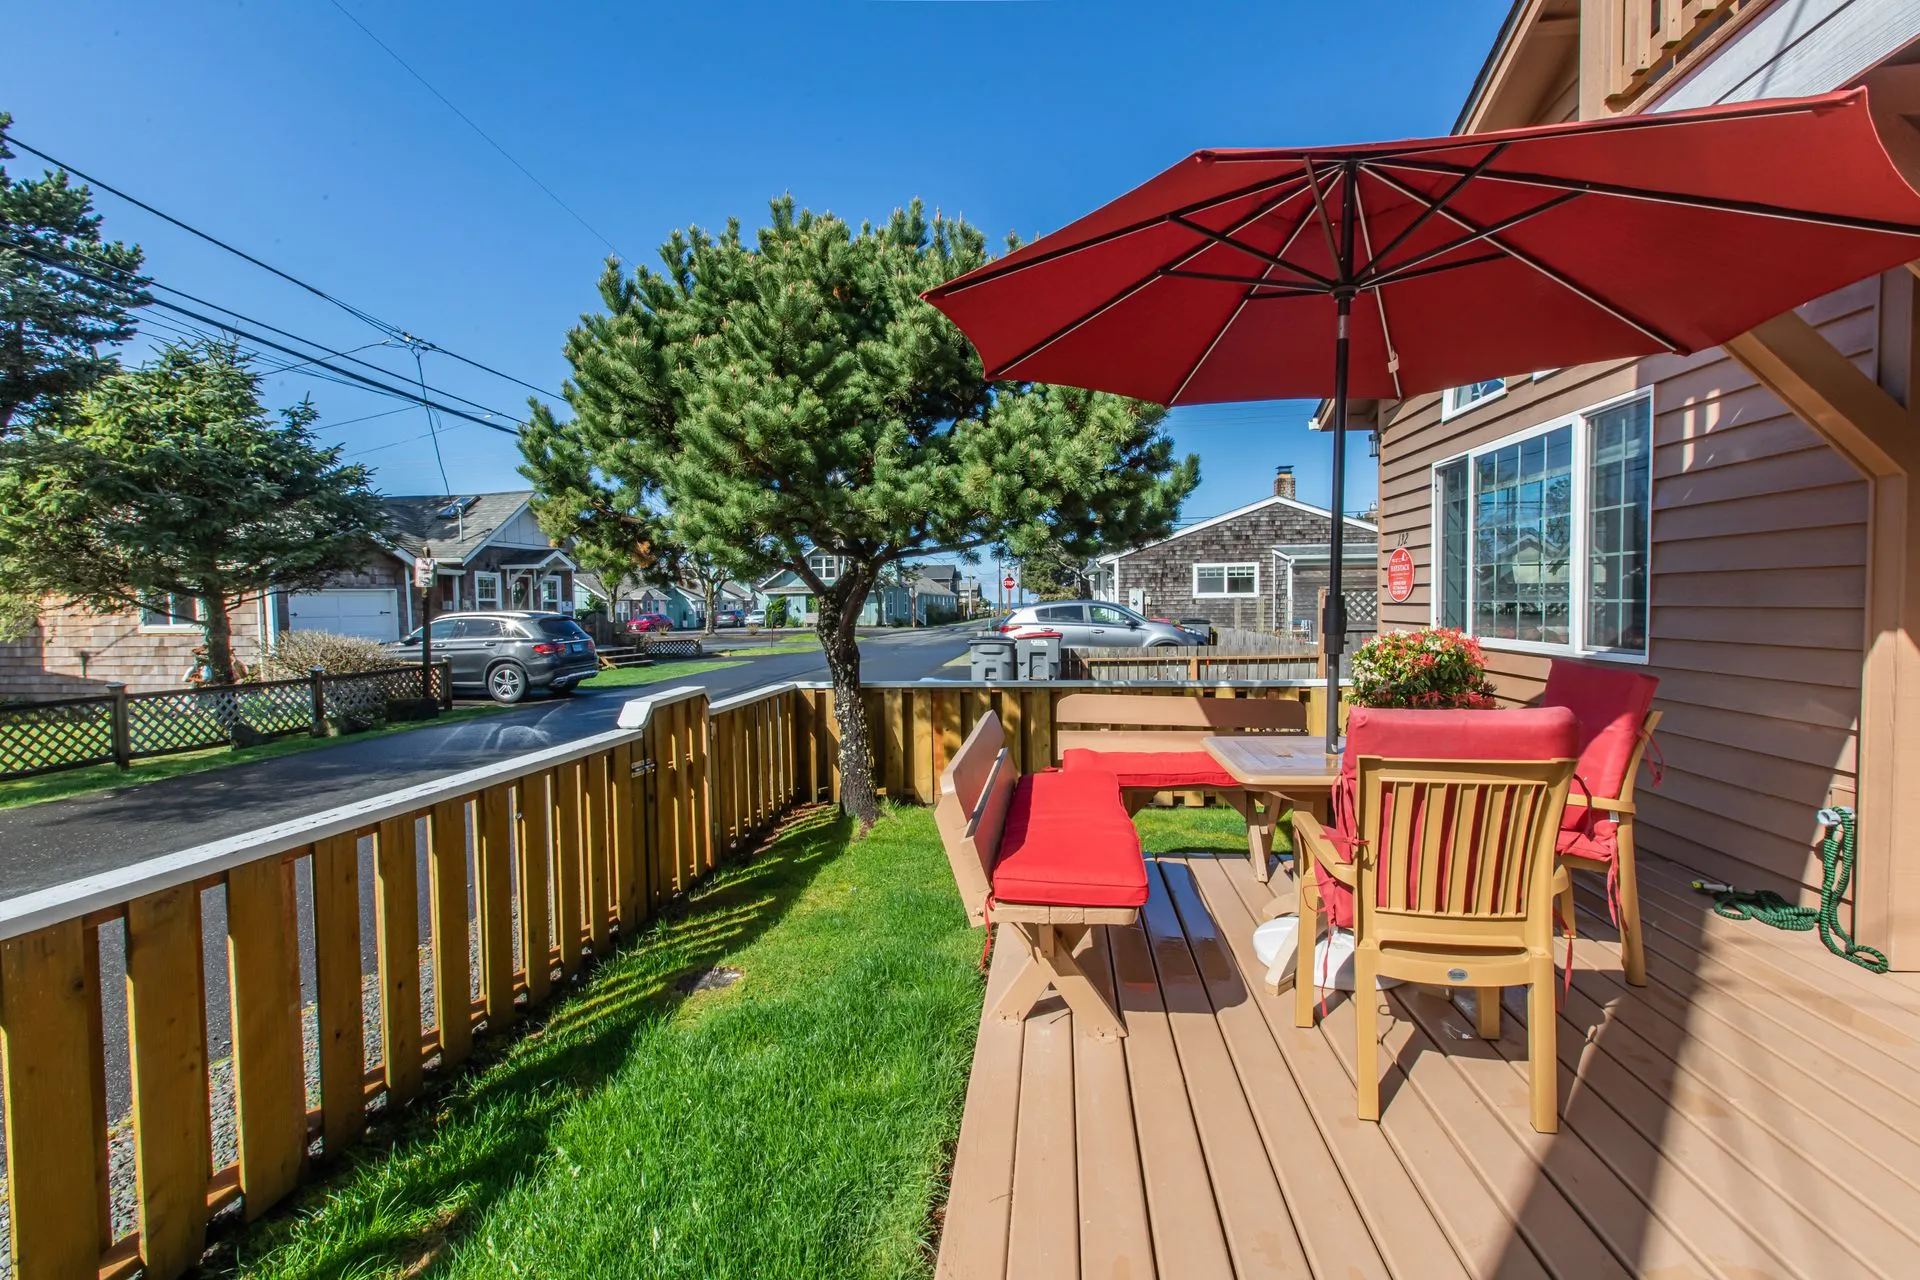 Vacation Rental in Cannon Beach, Puffin Nest patio deck with chairs